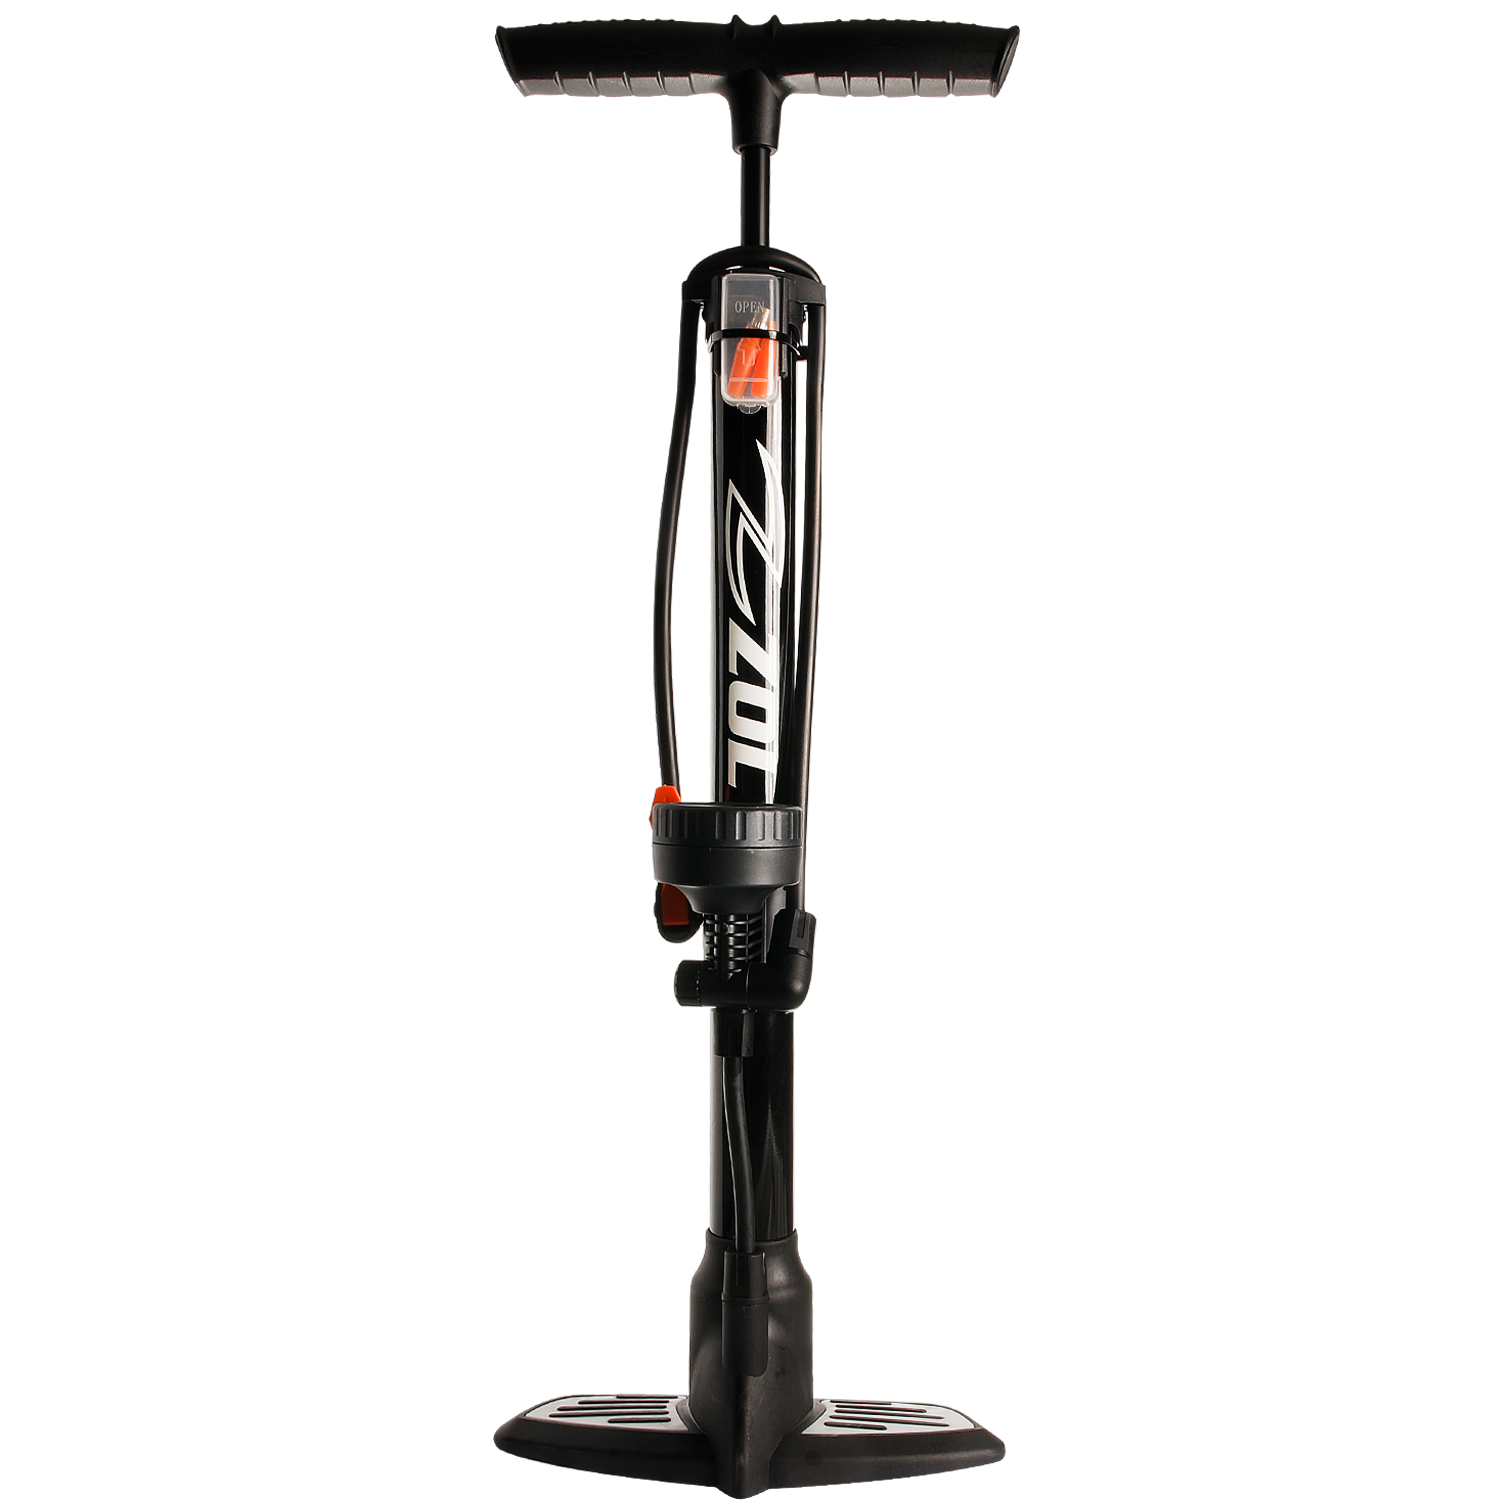 ZOL High Pressure Bicycle Bike Floor Pump Up to 120PSI/11BAR with Gauge and Smart Head - Zol Cycling